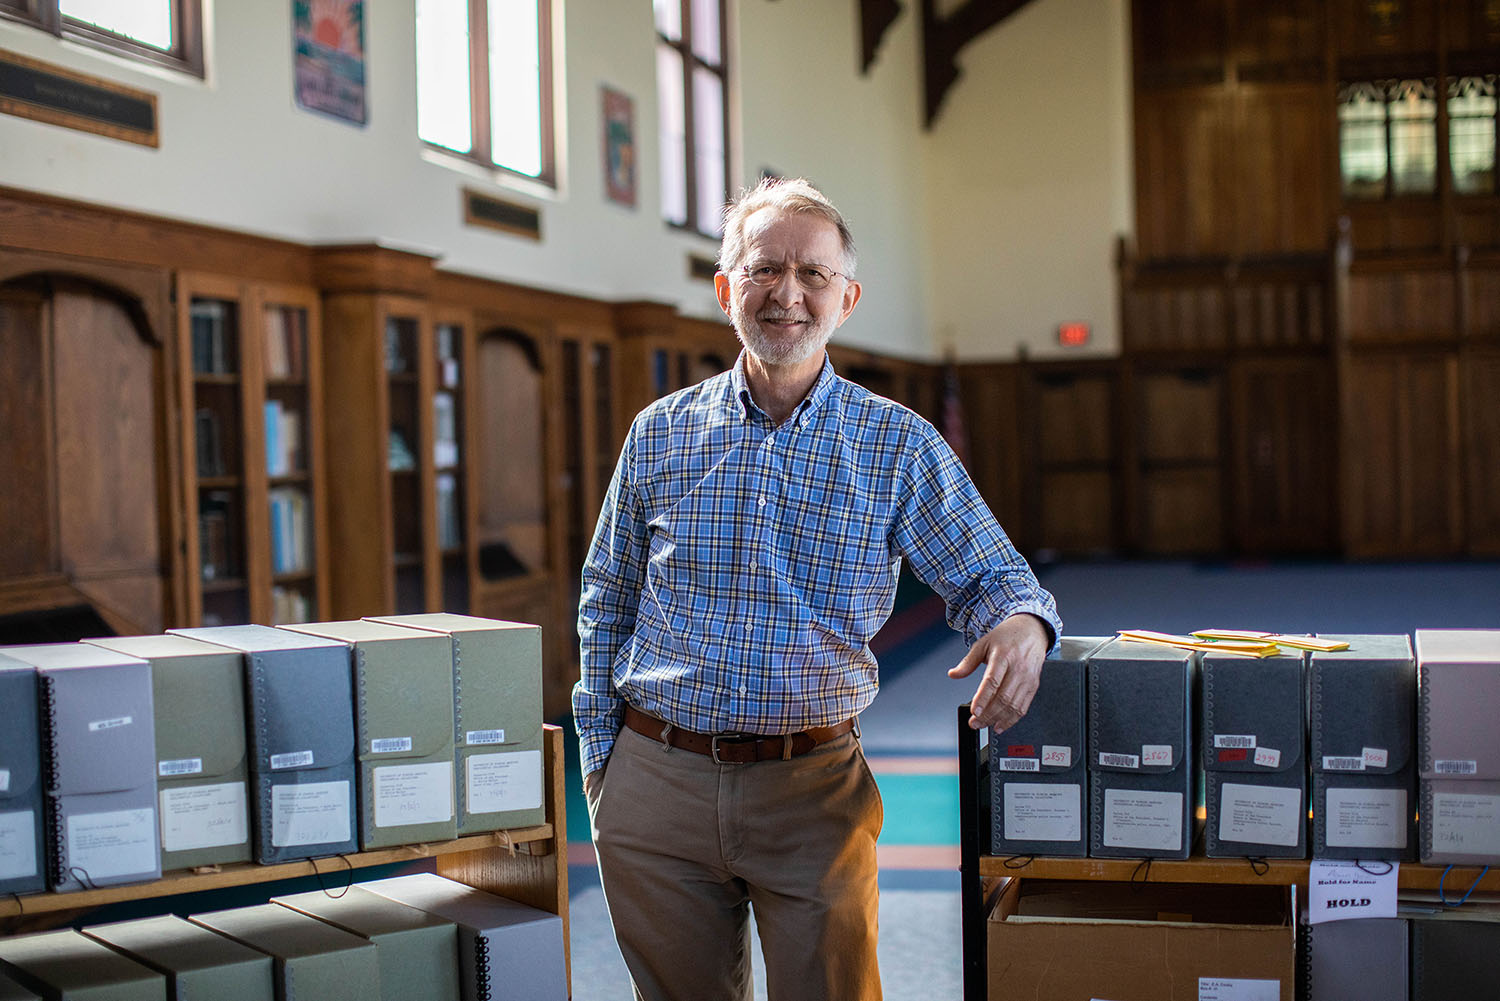 <p>Carl Van Ness has worked as an archivist at the George A. Smathers Libraries for nearly 40 years. Photo Credit: University of Florida</p>